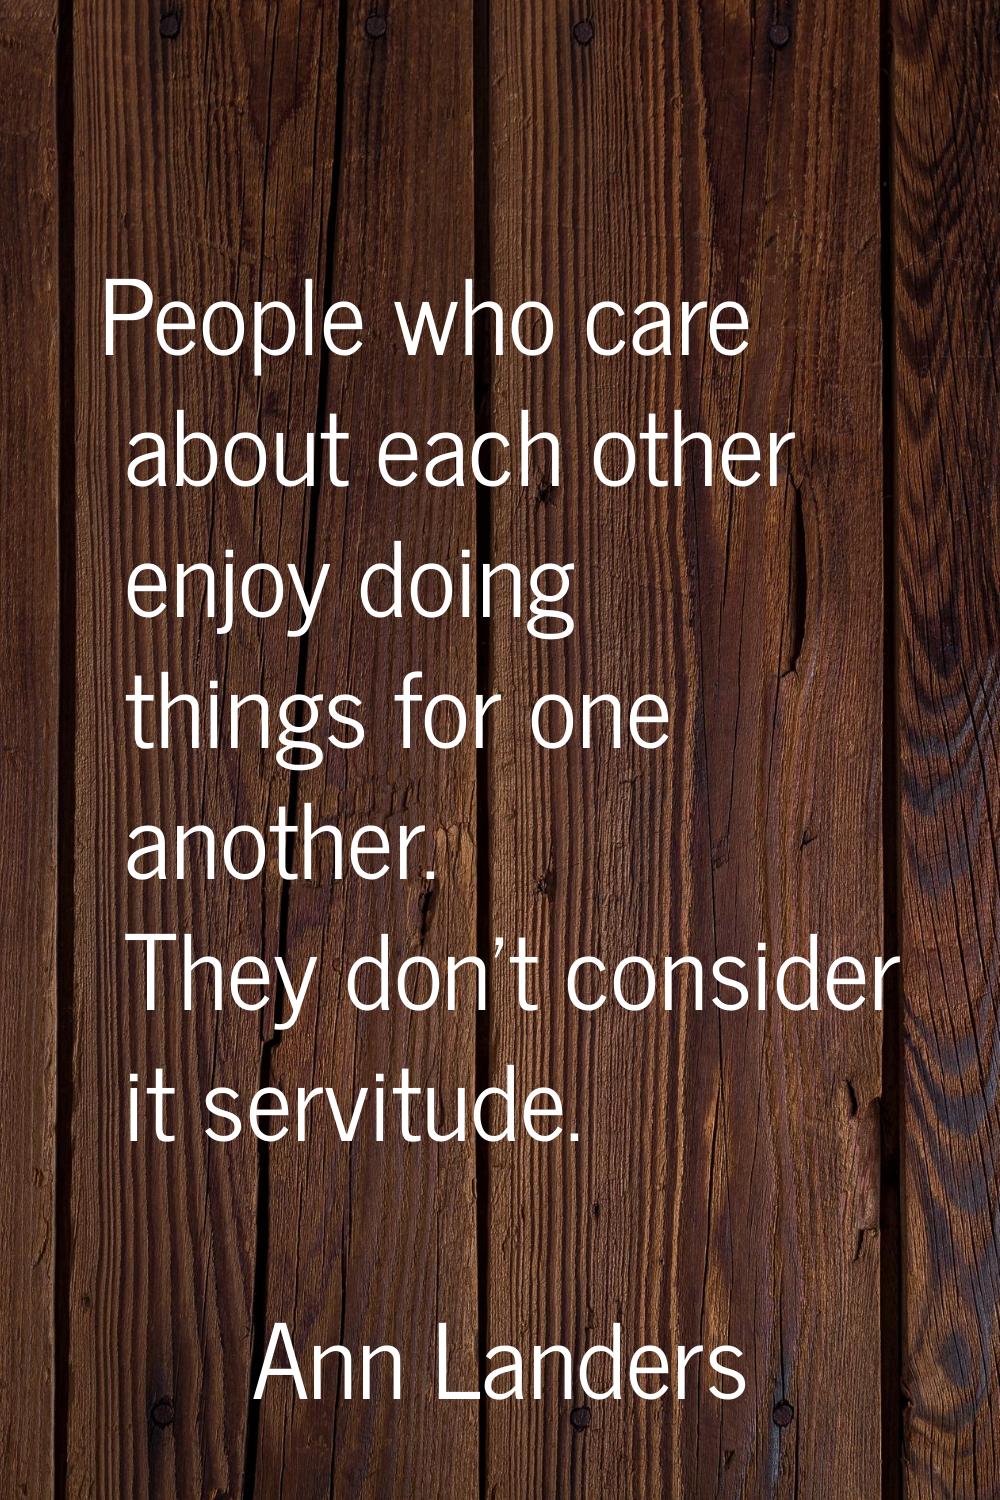 People who care about each other enjoy doing things for one another. They don't consider it servitu